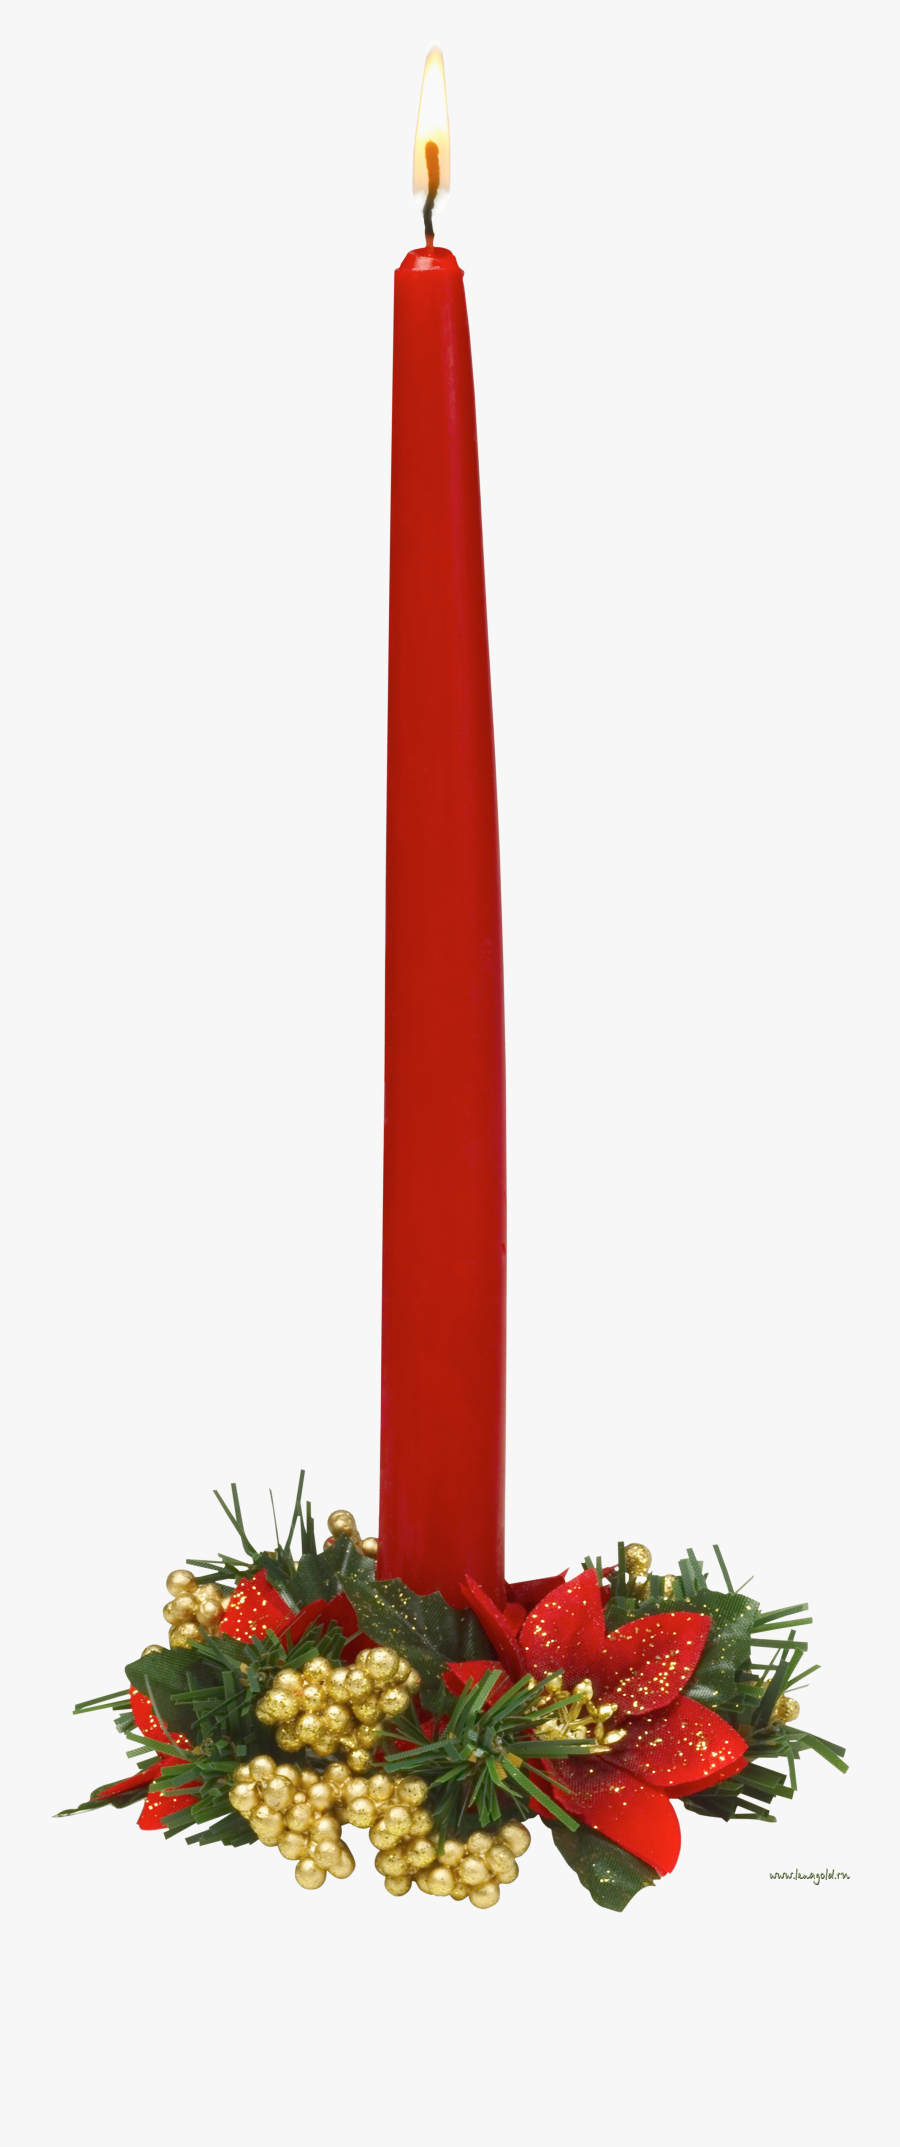 Christmas Candle Png, Transparent Clipart